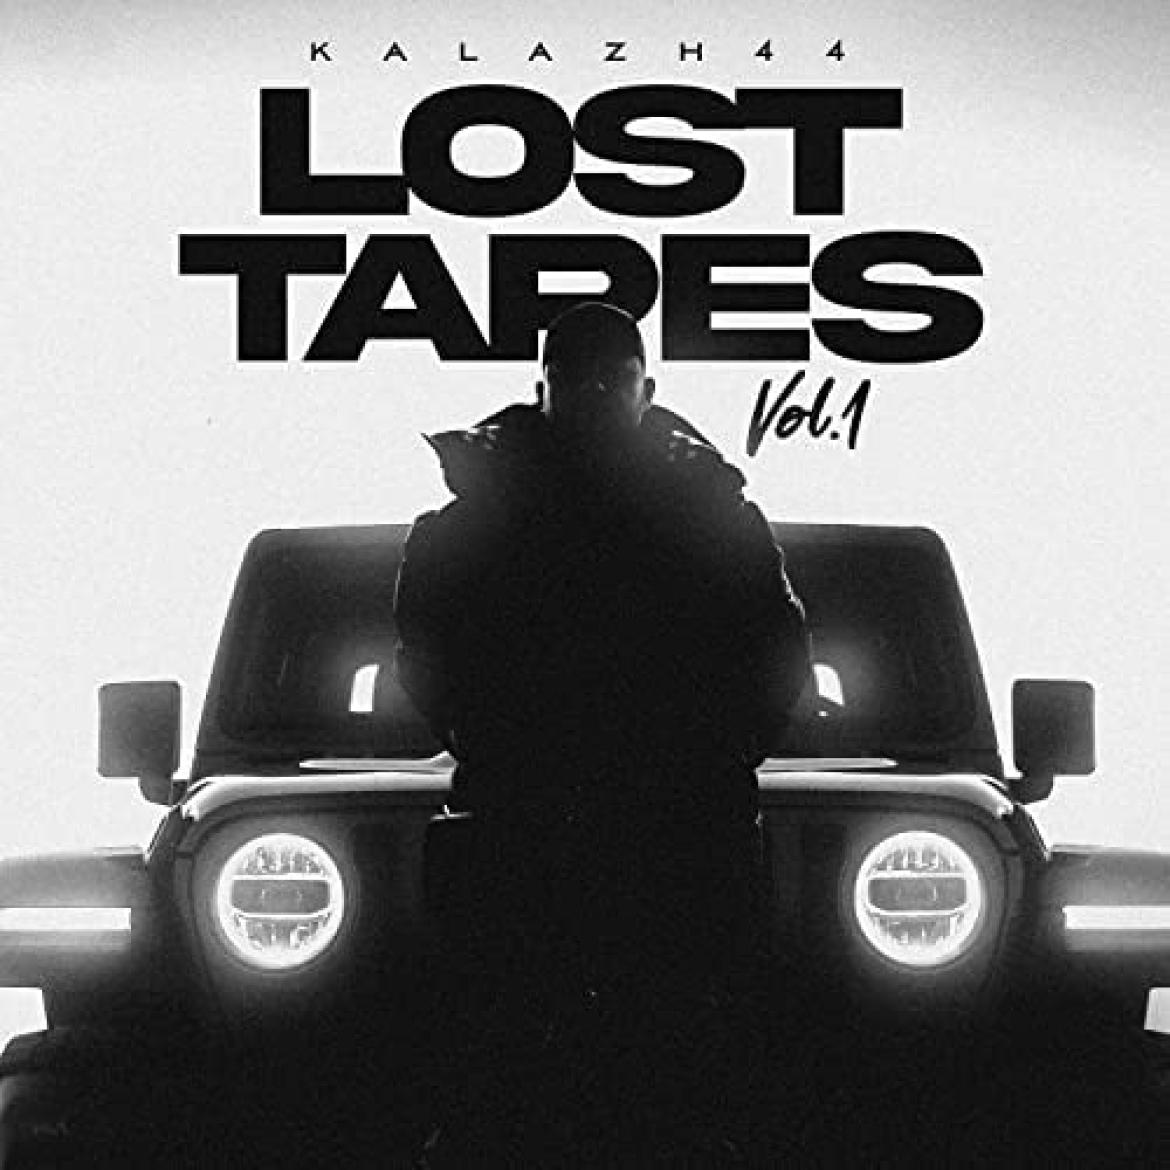 Cover zu Kalazh44s "Lost Tapes Vol. 1"-EP